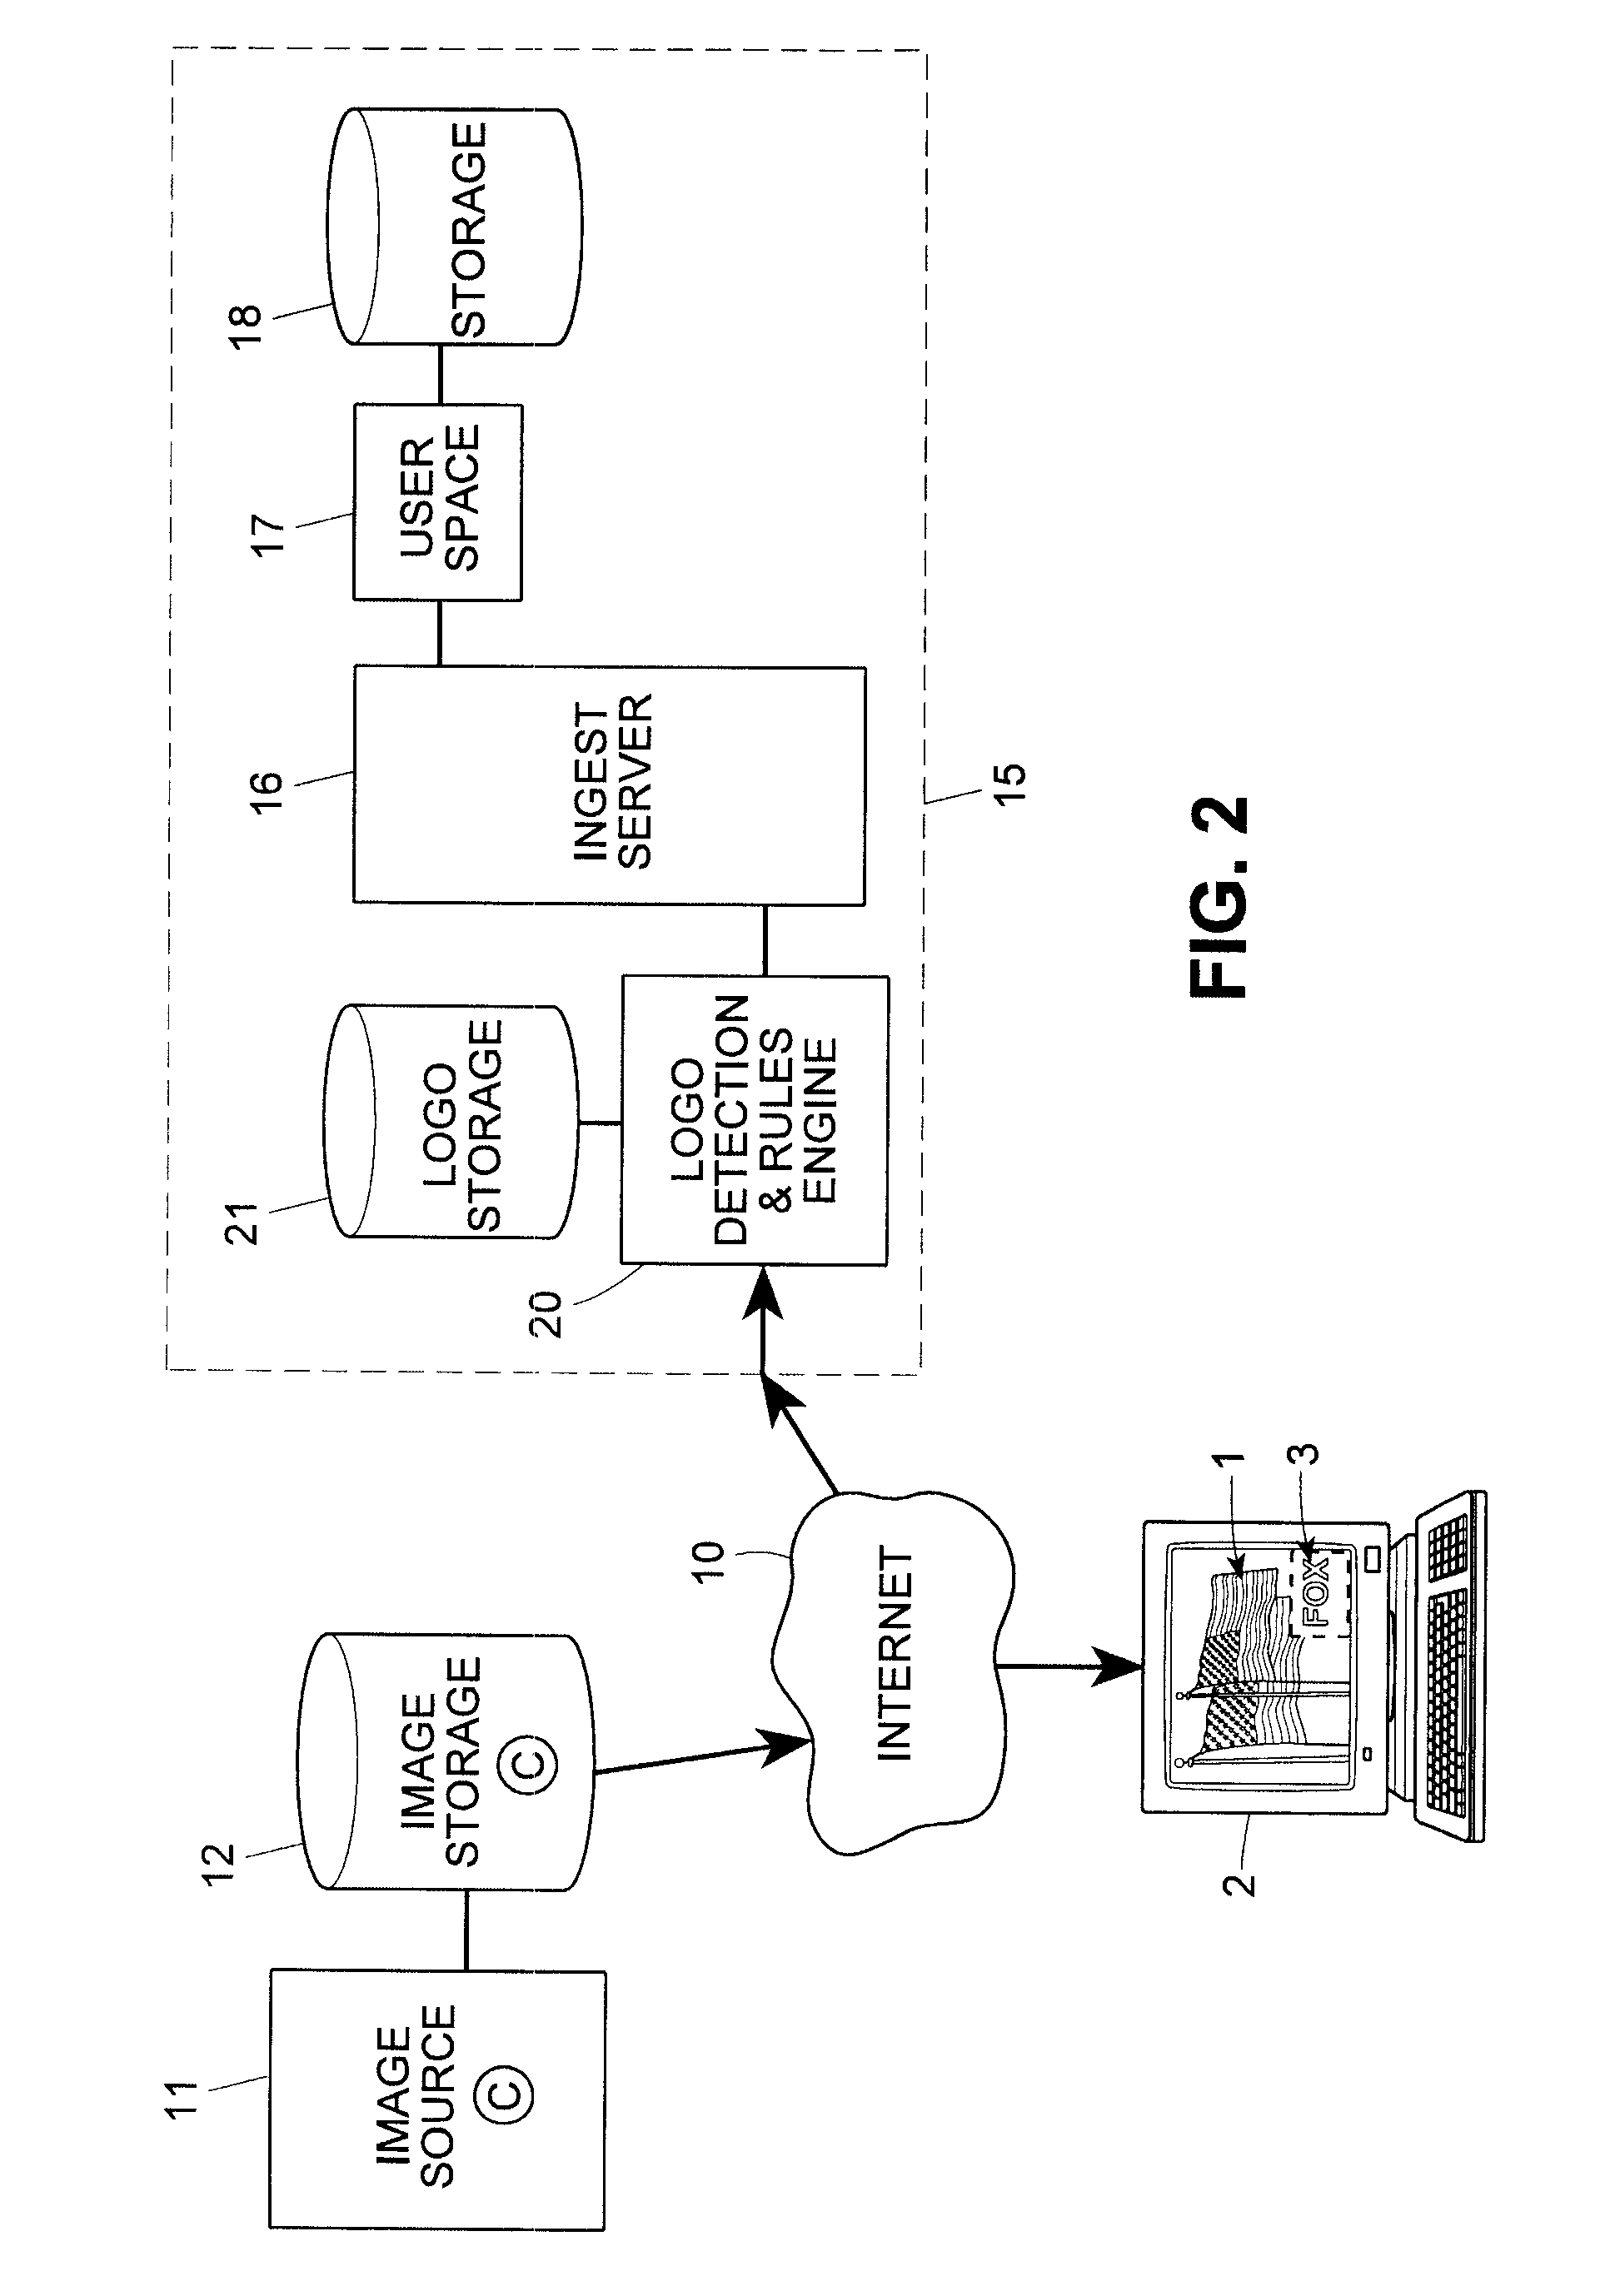 System and method for detecting the source of media content with application to business rules